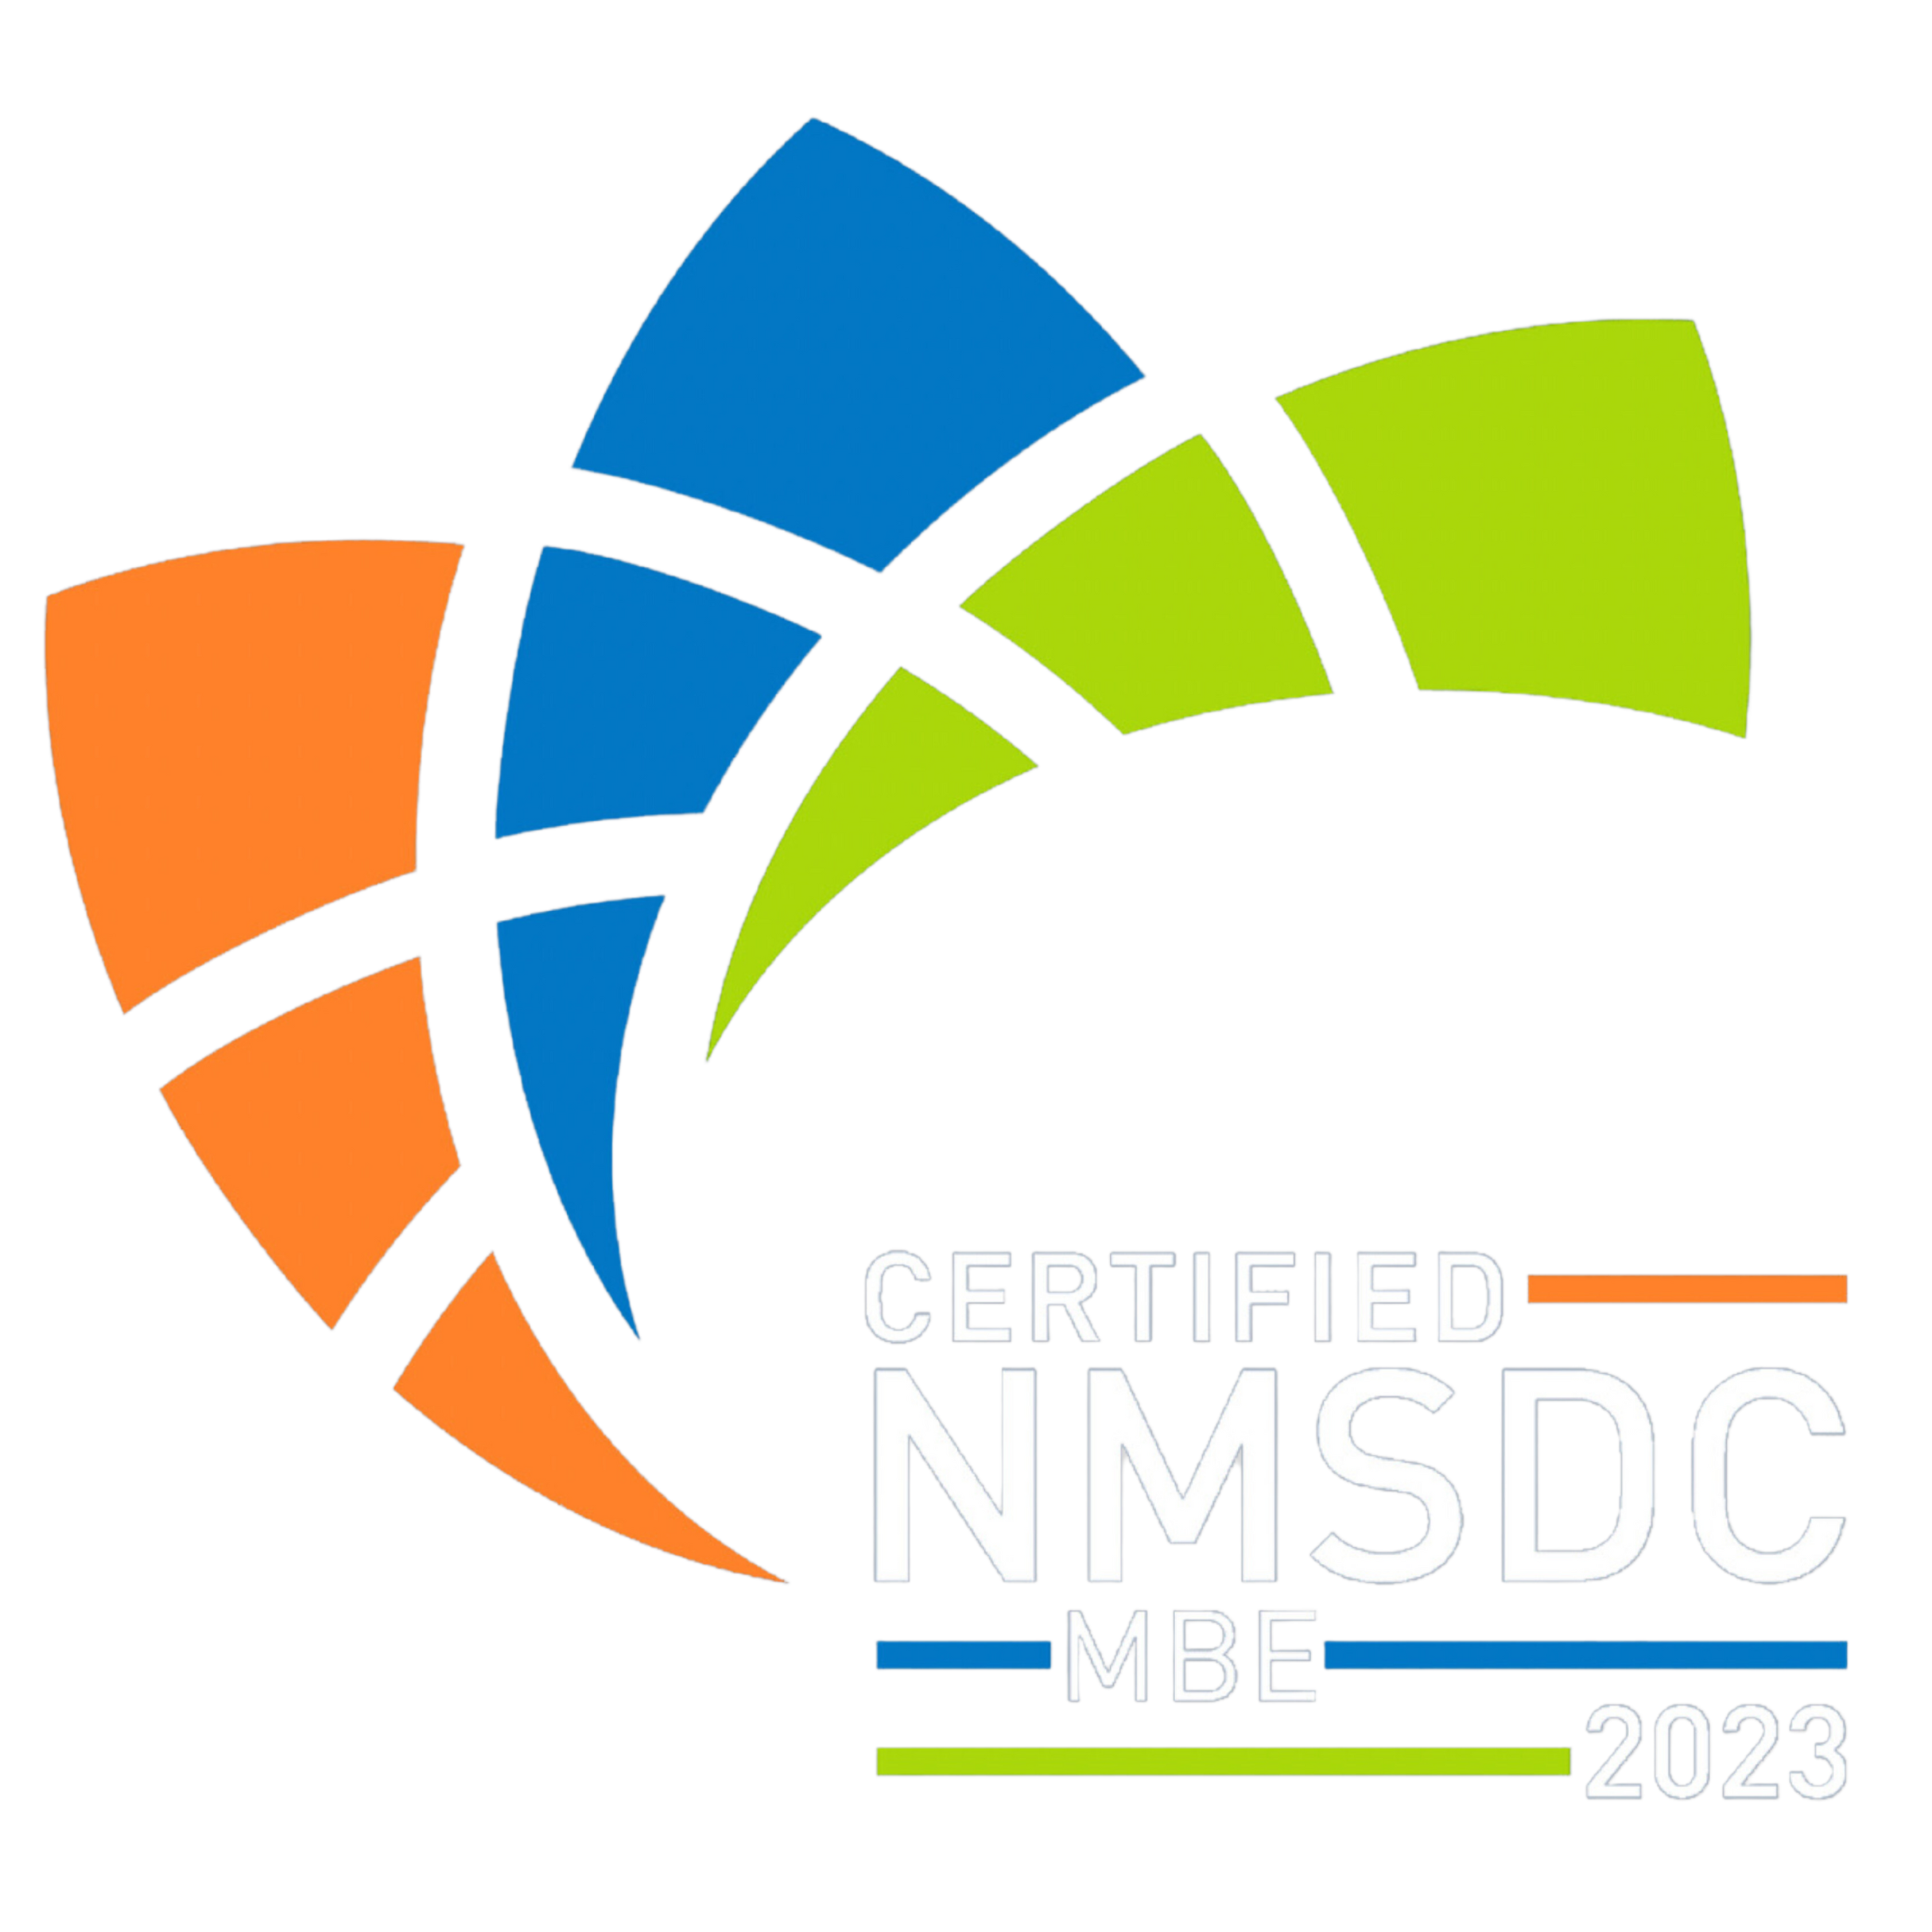 NMSDC-CERTIFIED